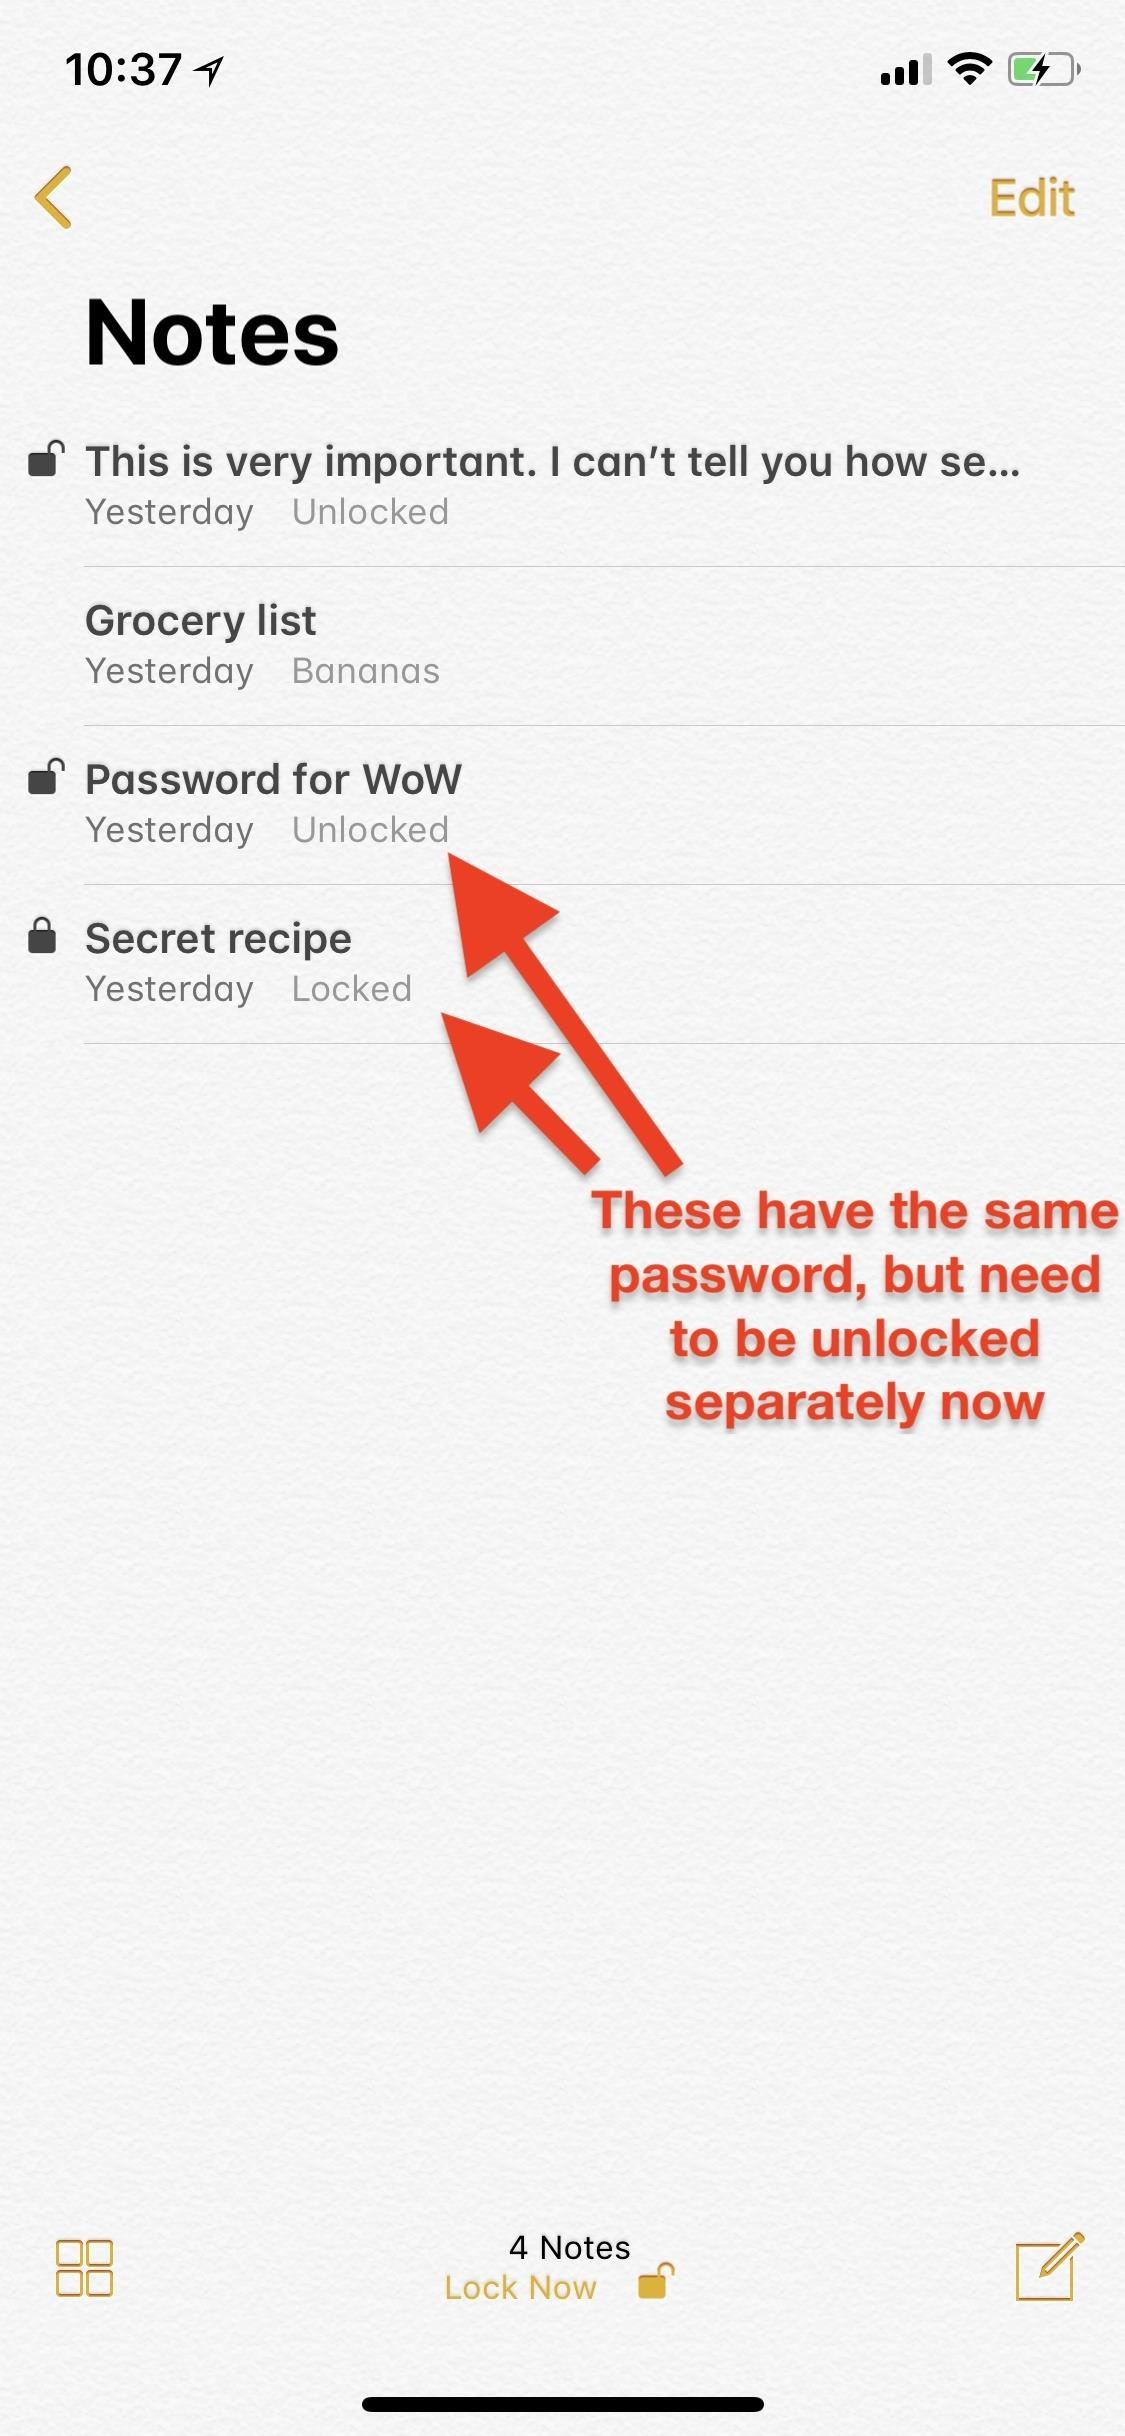 Notes 101: The Trick to Protecting Each Note with Separate, Unique Passwords